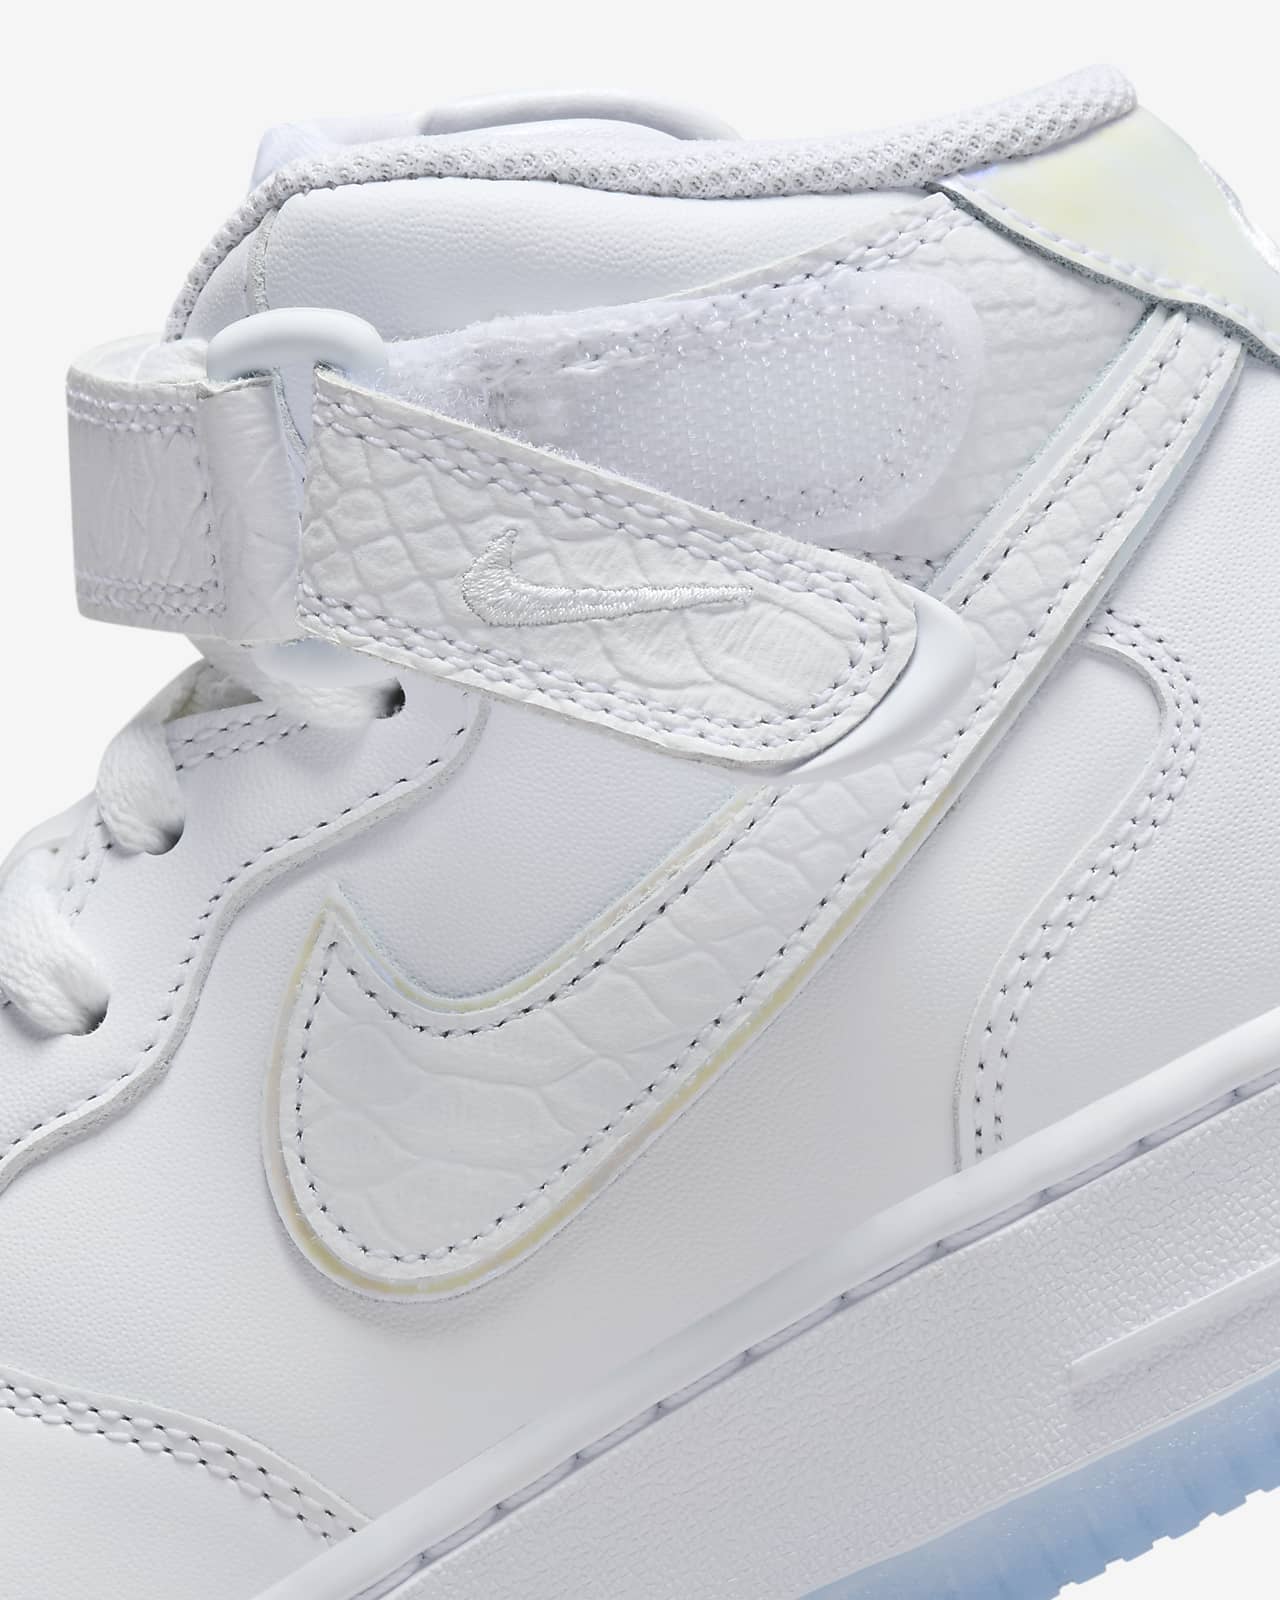 Nike Releases Basketball-Inspired Air Force 1